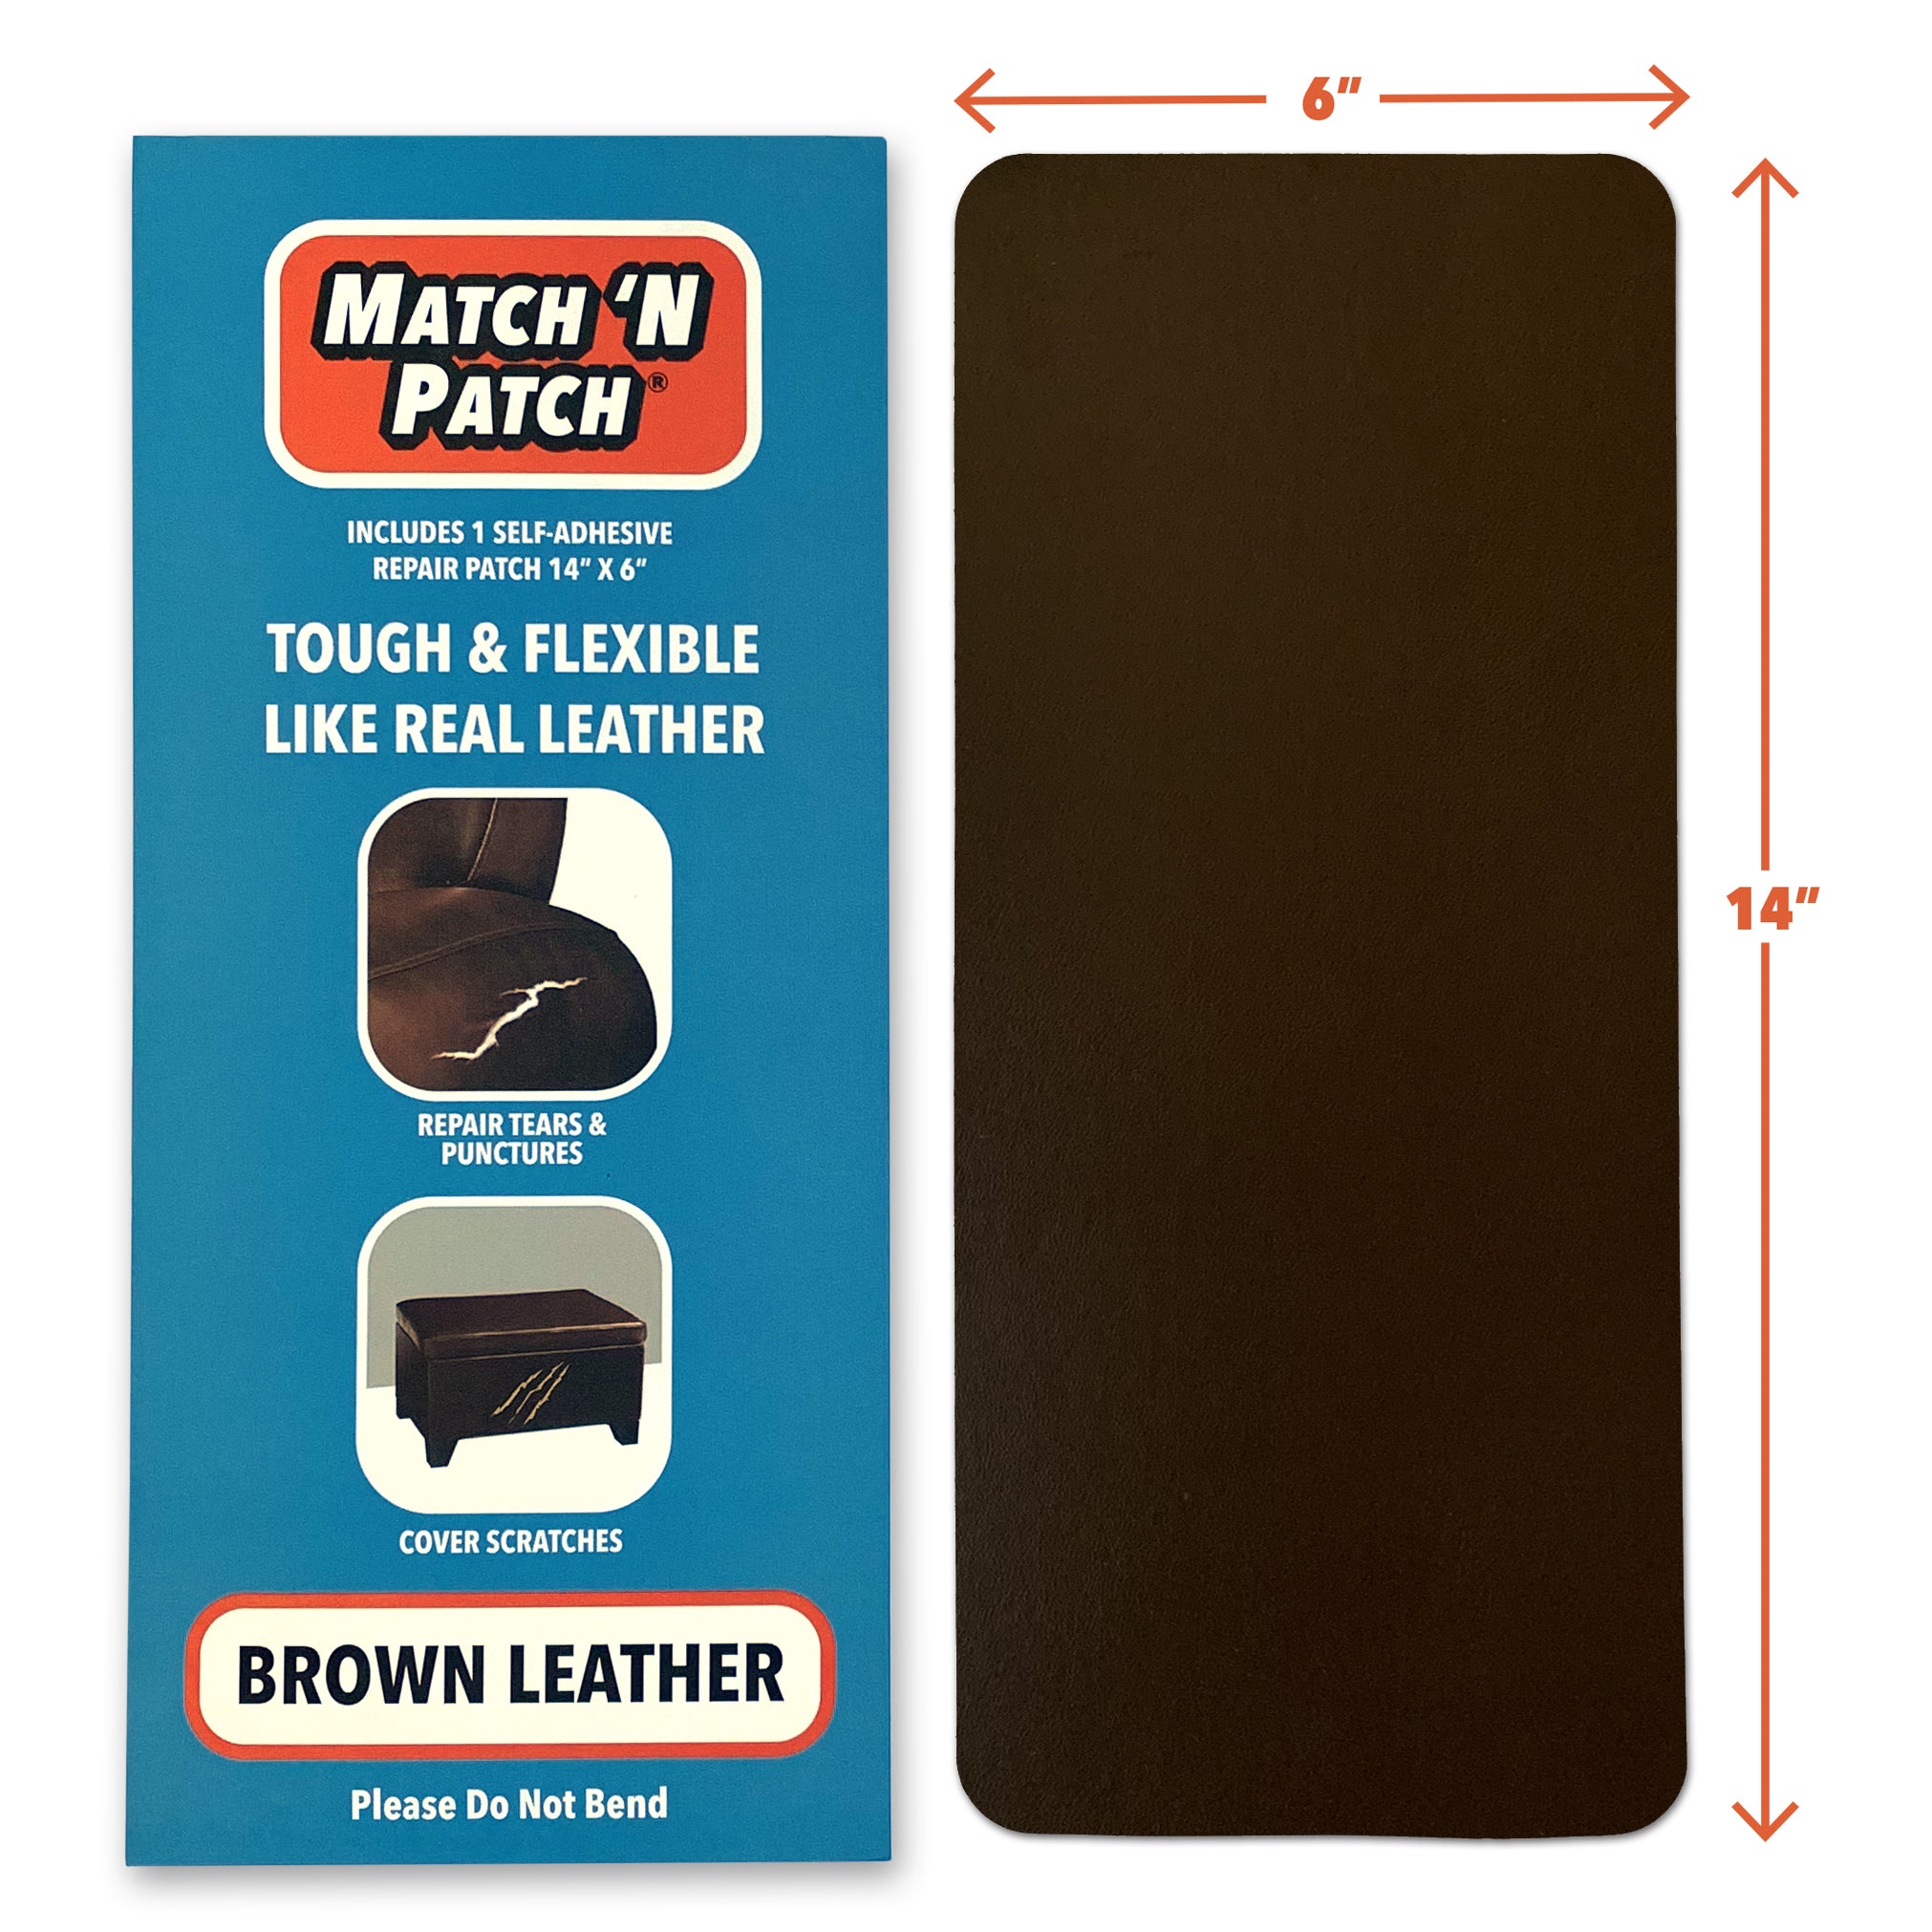 Leather Repair Patch 7.9 x 11.8, Self-Adhesive Leather Patches